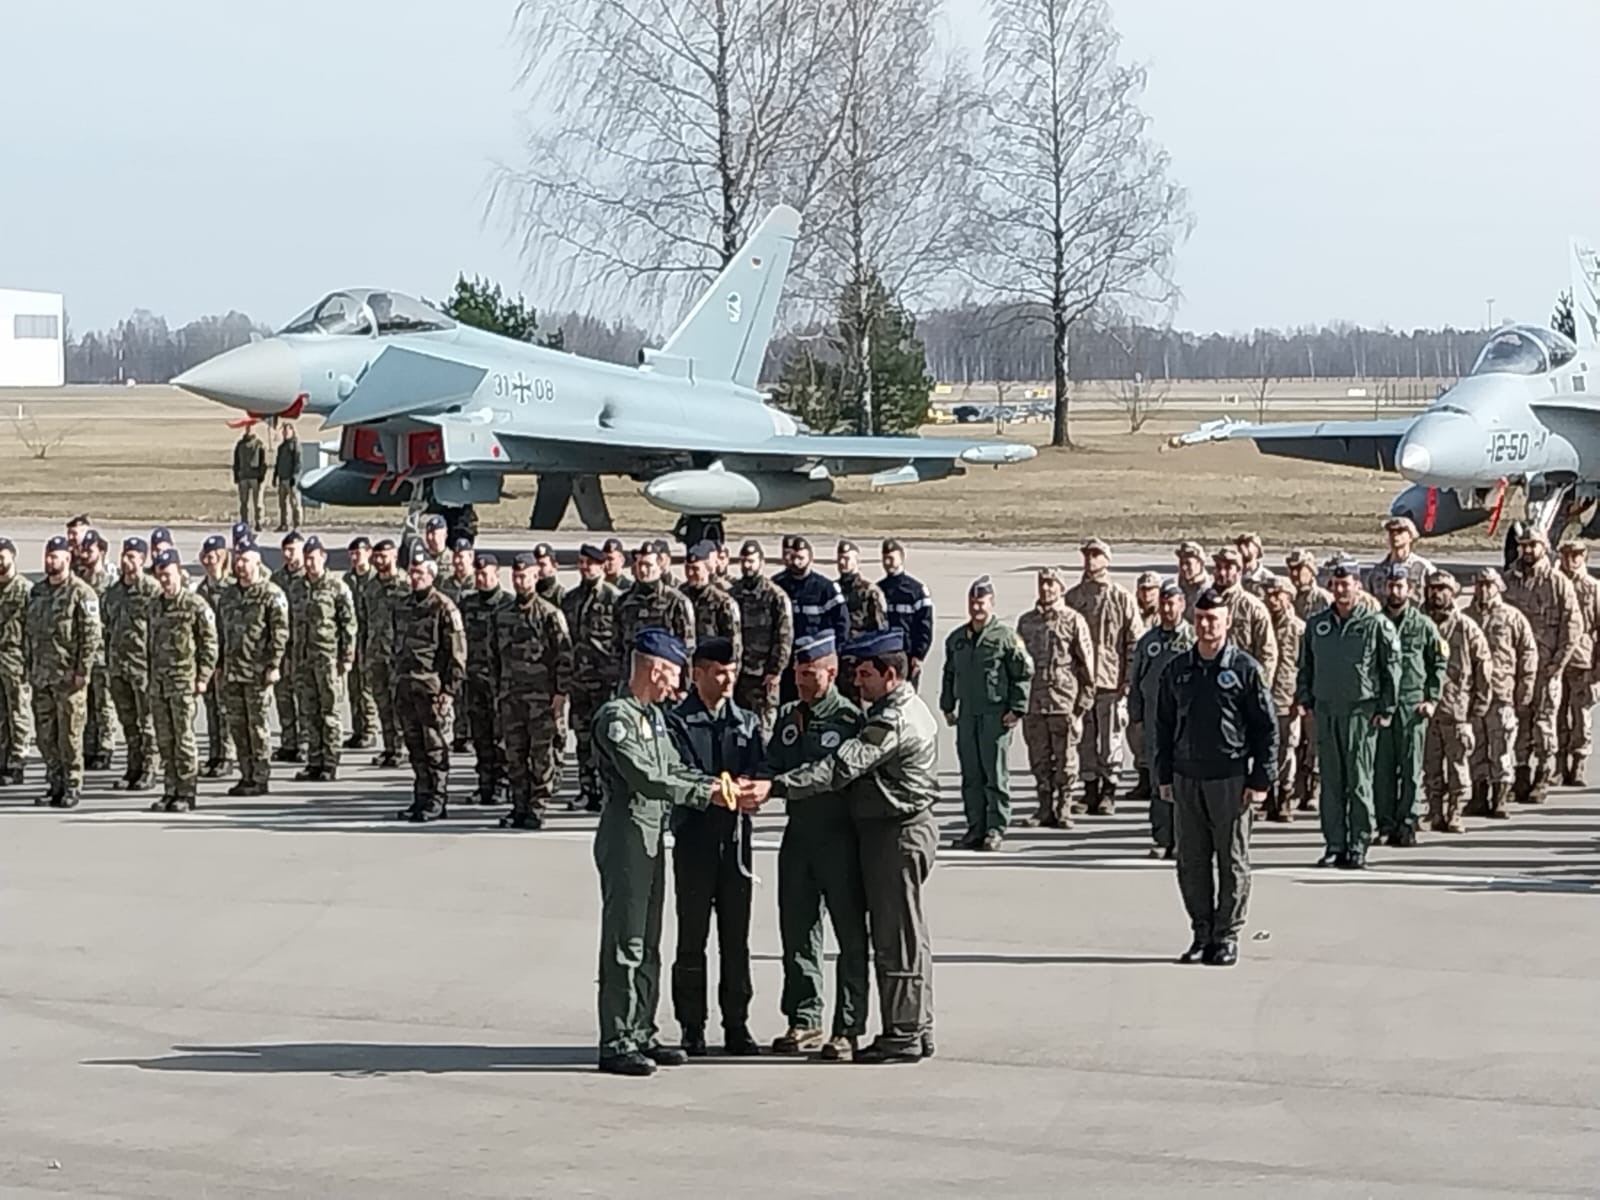 Handing over the airspace key of the Baltic States.